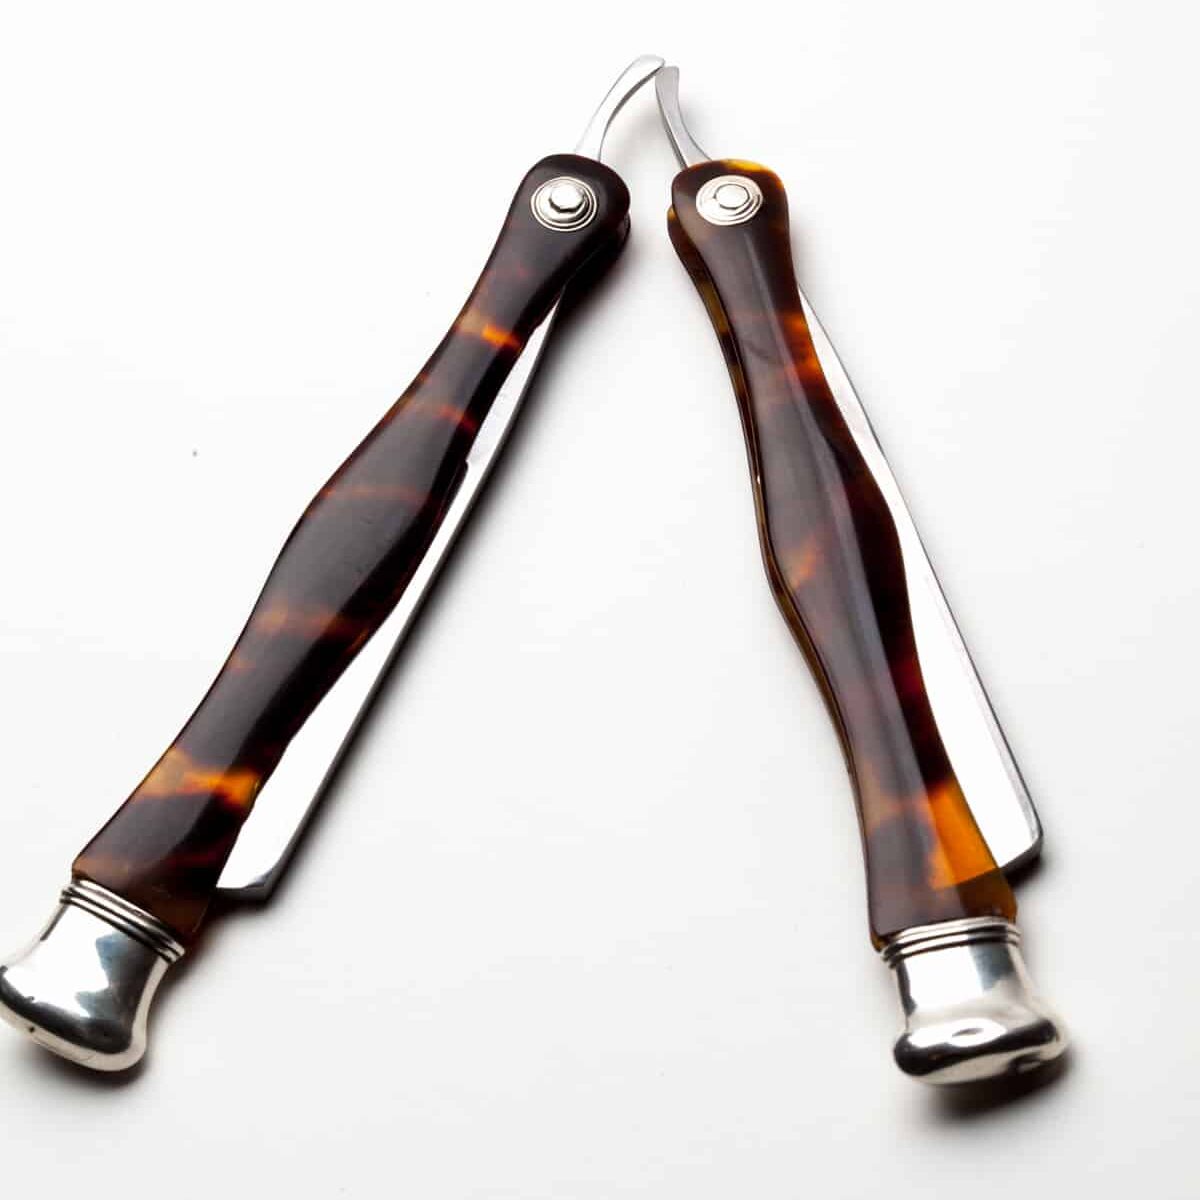 French Straight Razors With New Blades Set in Tortoise Shell Scales (1 of 1)